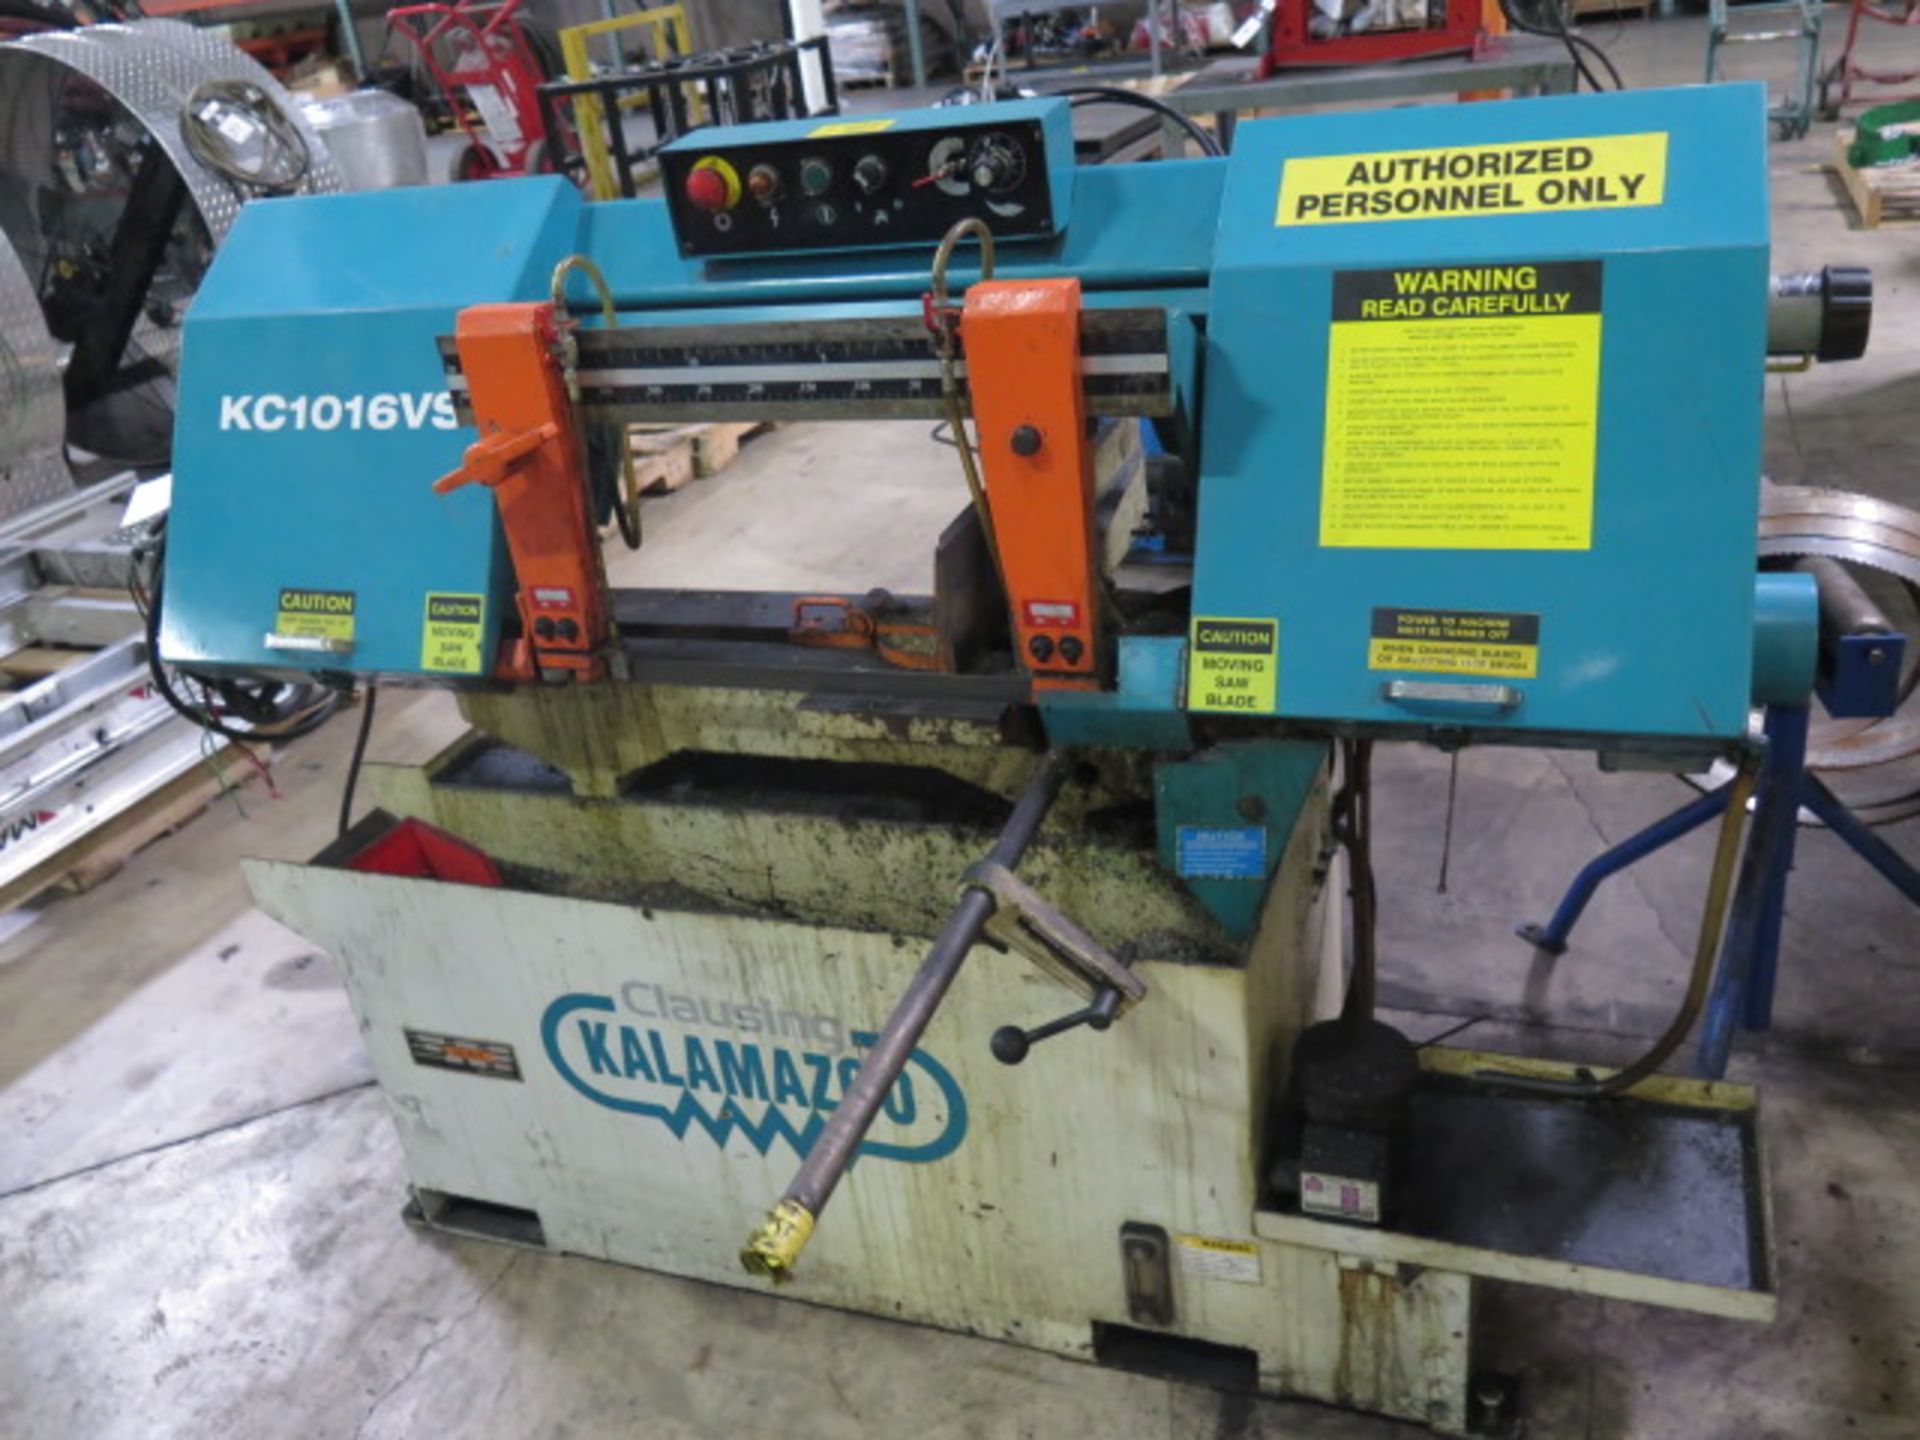 2012 Clausing / Kalamazoo KC1016VS 10” Vert Band Saw s/n 101107380 w/ Manual Clamping, SOLD AS IS - Image 3 of 10